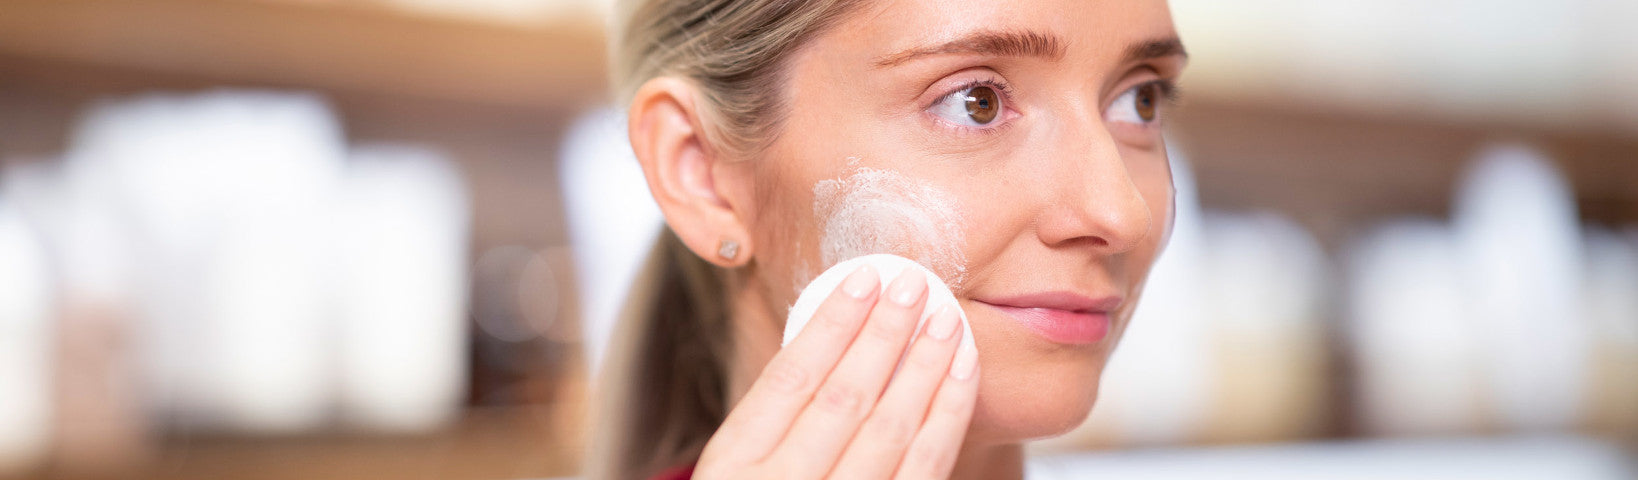 IS YOUR CLEANSER CAUSING YOUR BREAKOUTS?